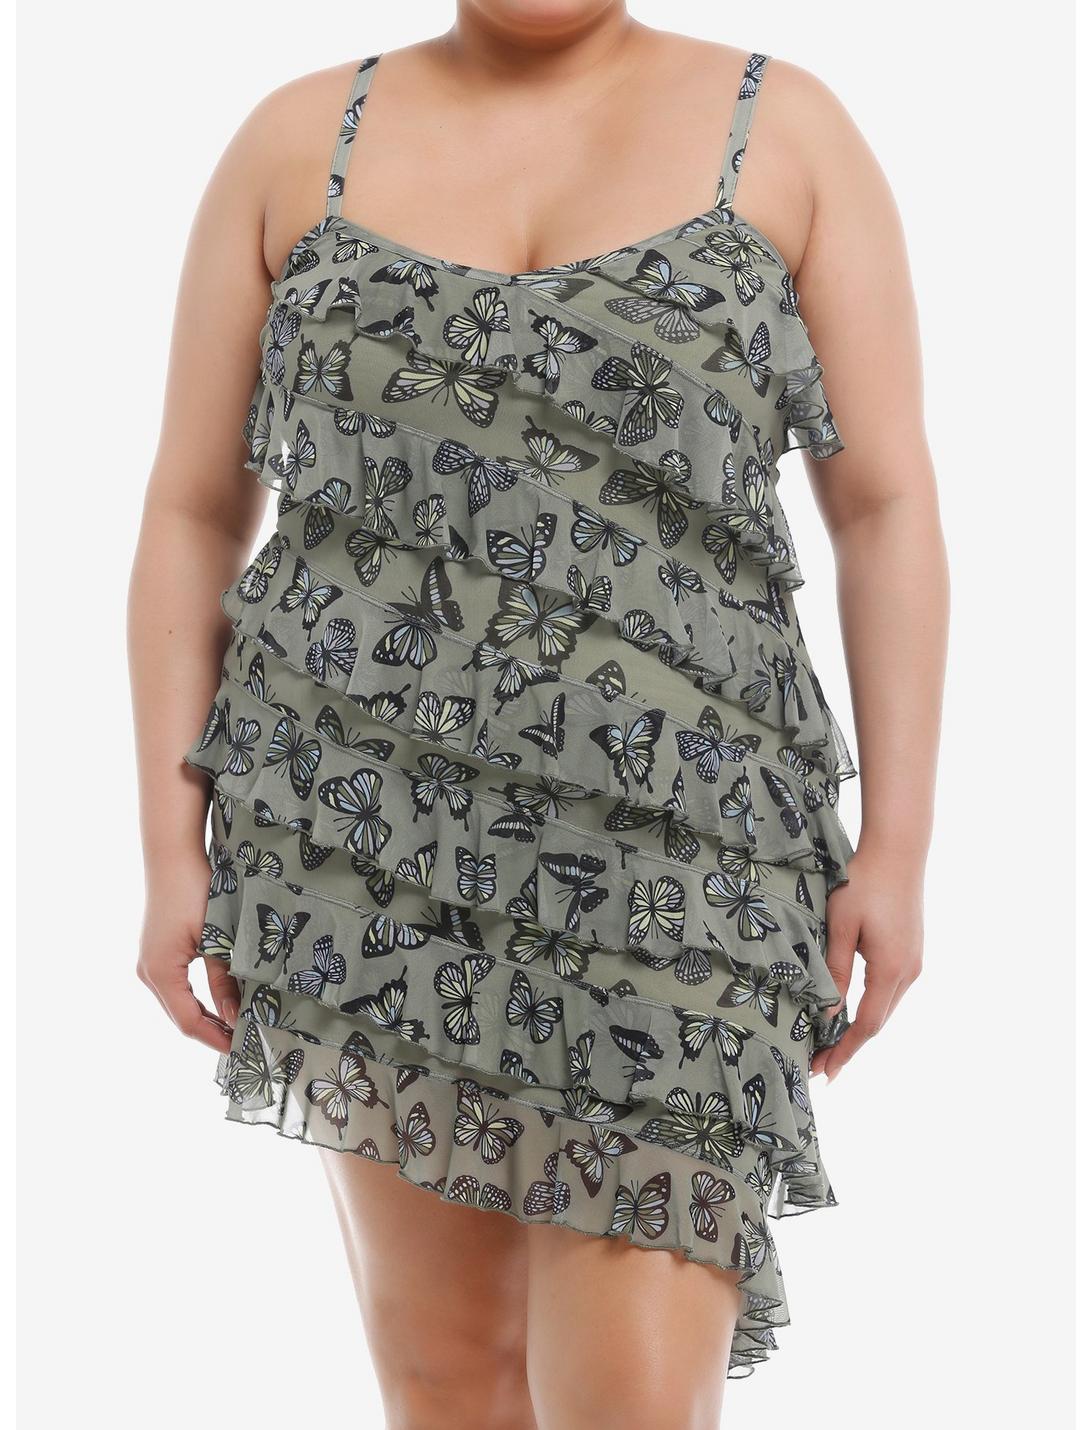 Thorn & Fable® Olive Butterfly Ruffle Cami Dress Plus Size, MULTI, hi-res